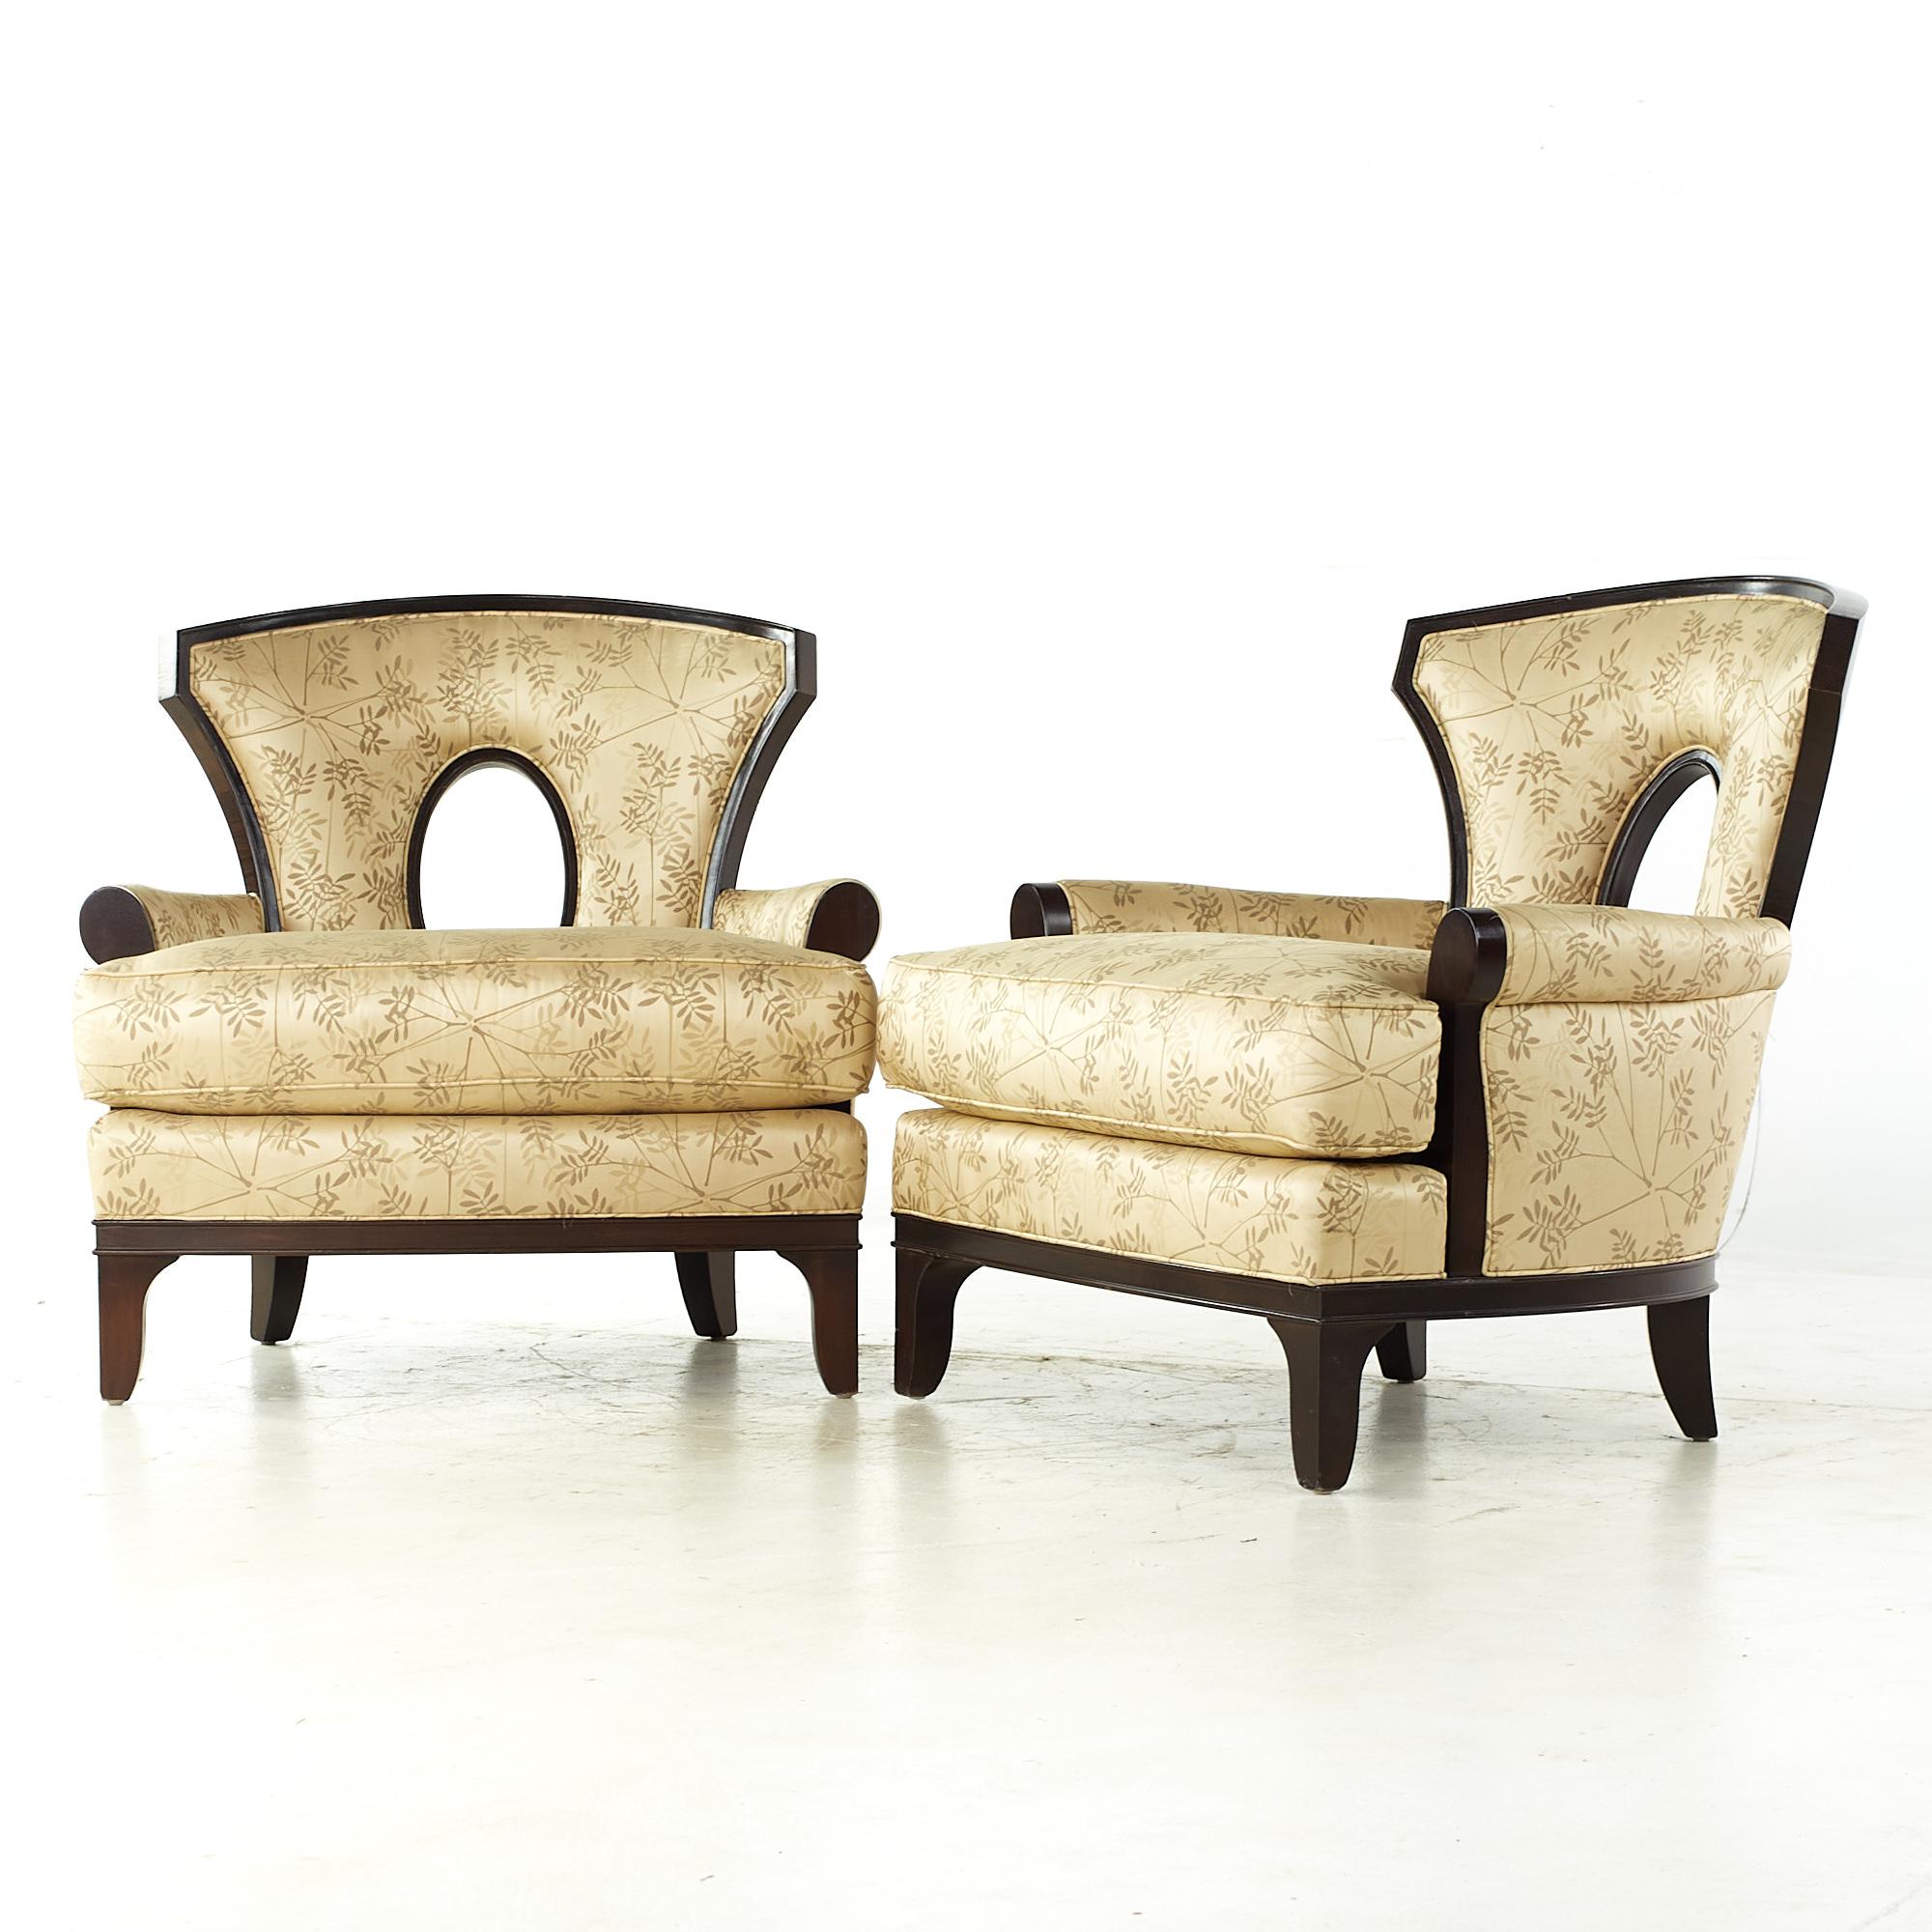 Modern Barbara Barry for Henredon Lounge Chairs - Pair For Sale